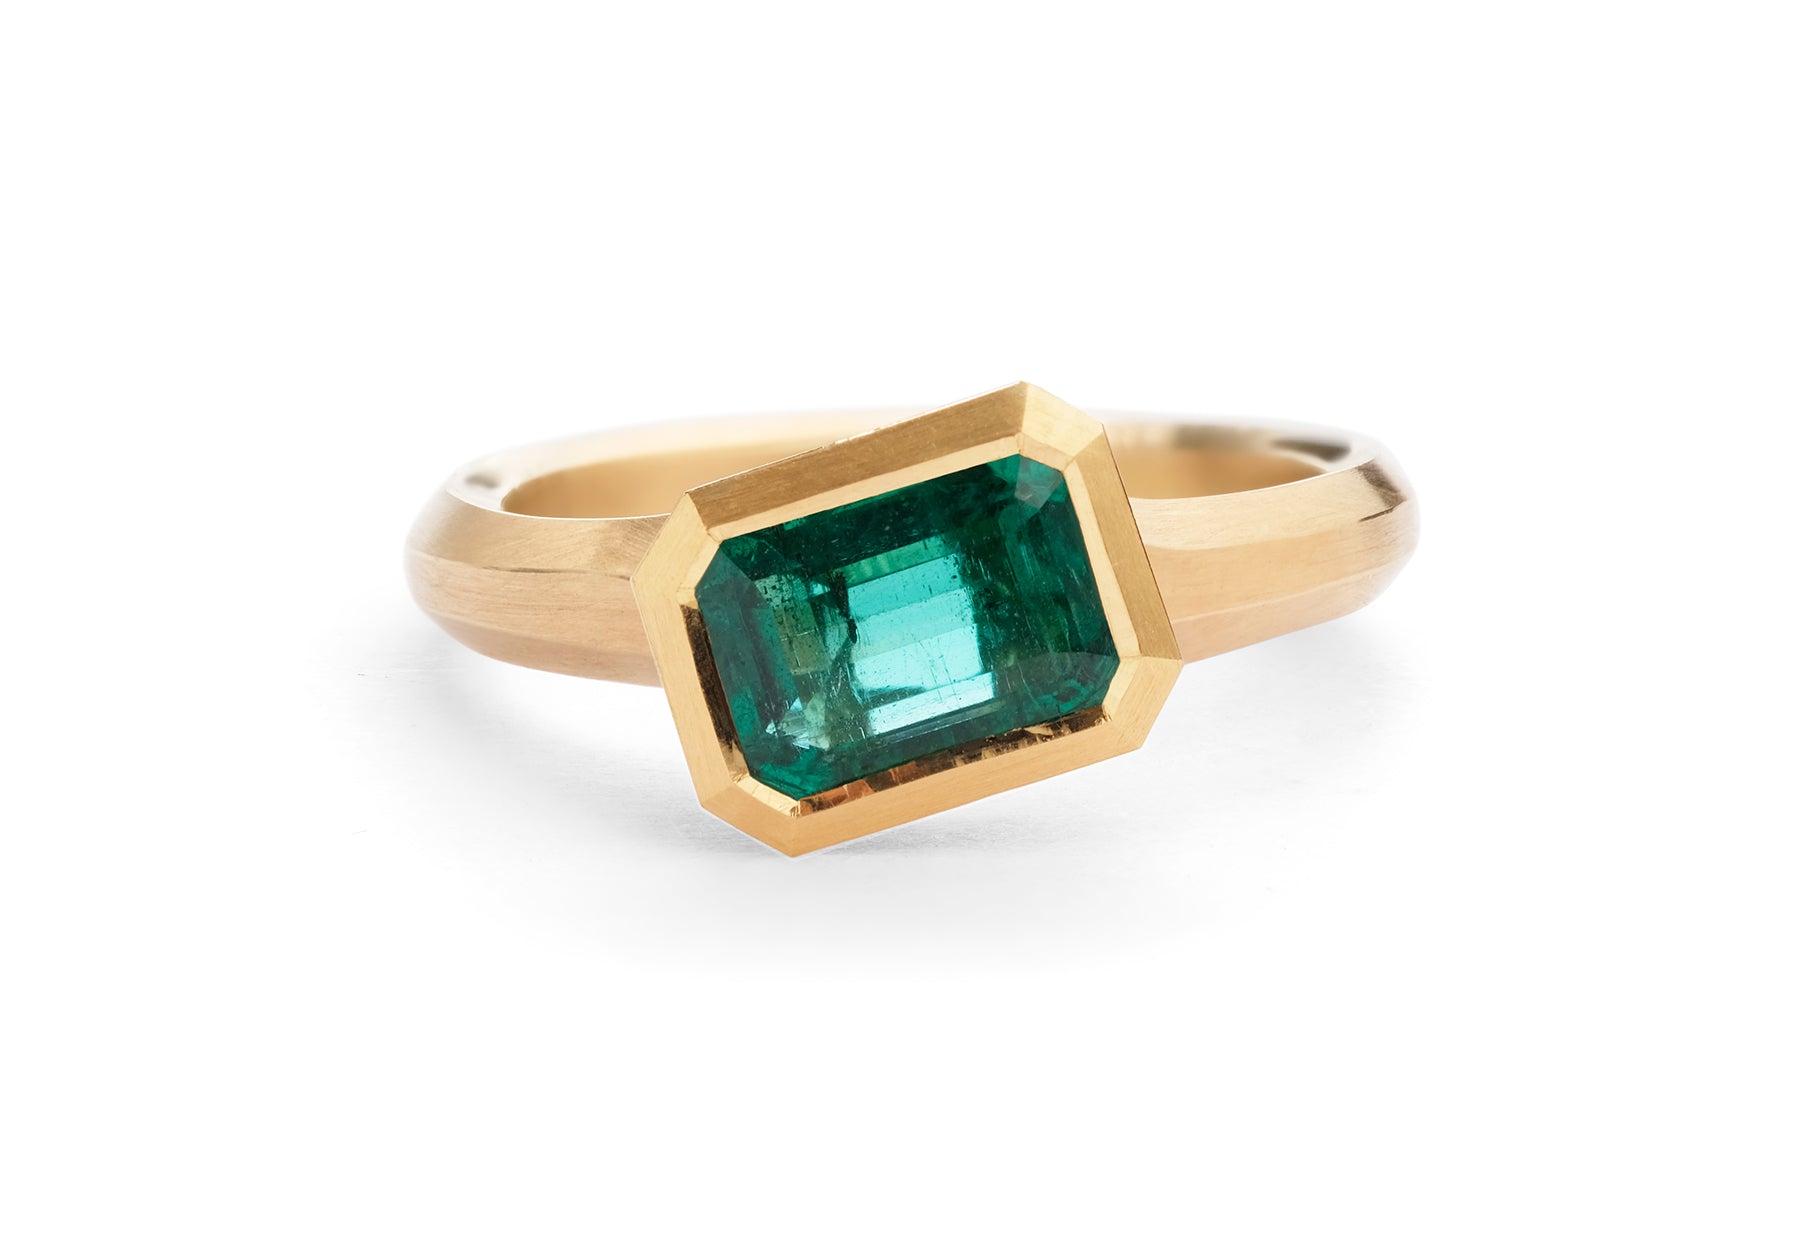 Arris carved emerald cut emerald yellow gold engagement ring